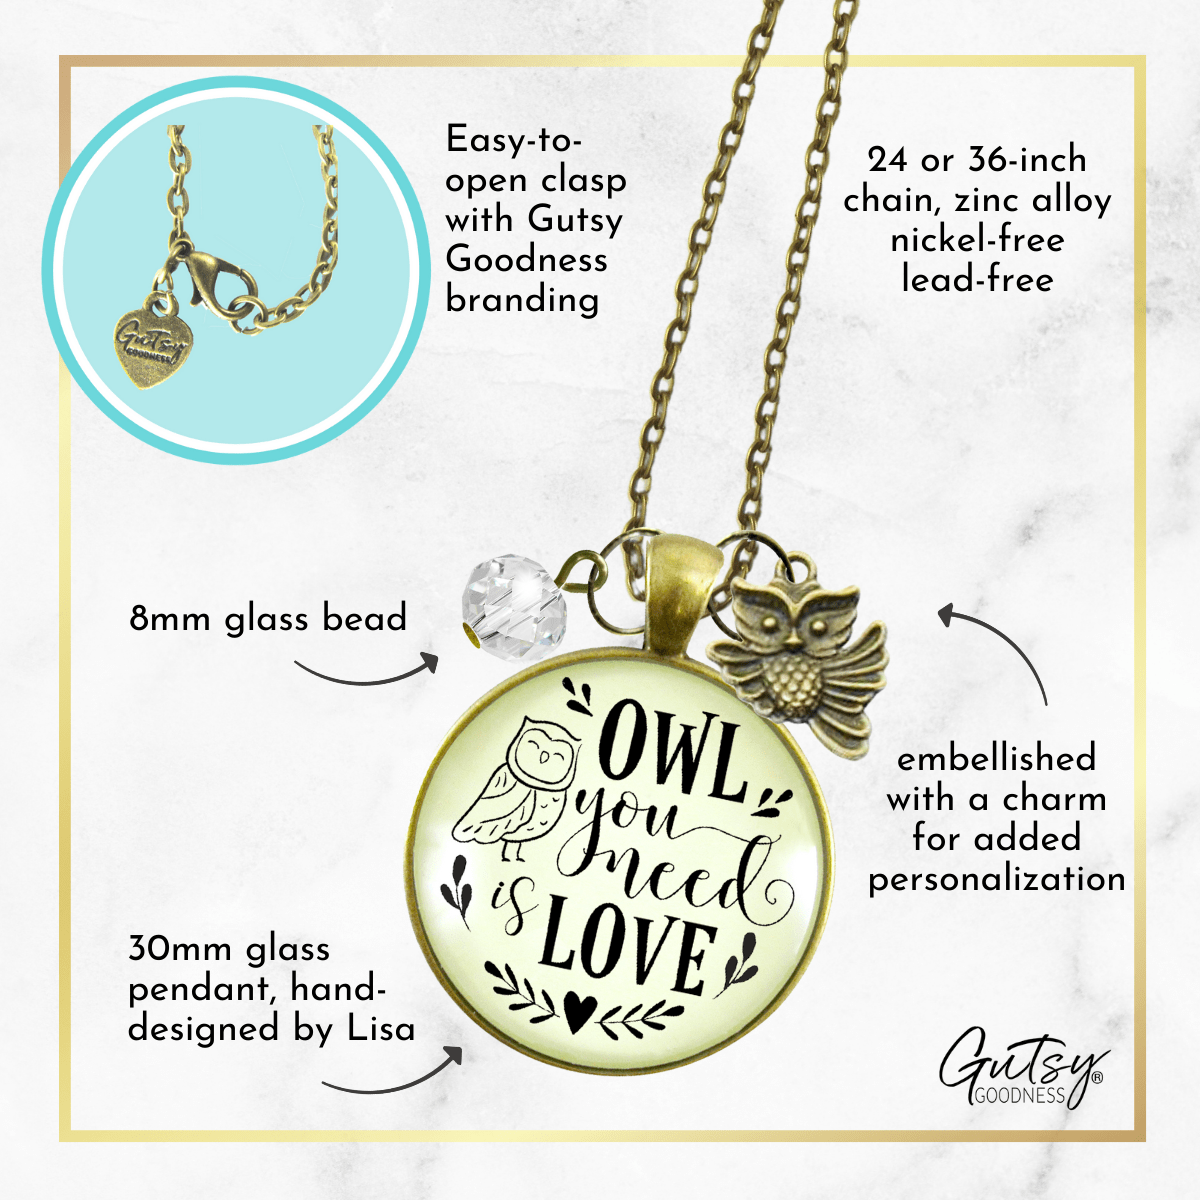 Gutsy Goodness Owl Necklace You Need Love Vintage Friendship Quote Pendant Jewelry - Gutsy Goodness Handmade Jewelry;Owl Necklace You Need Love Vintage Friendship Quote Pendant Jewelry - Gutsy Goodness Handmade Jewelry Gifts